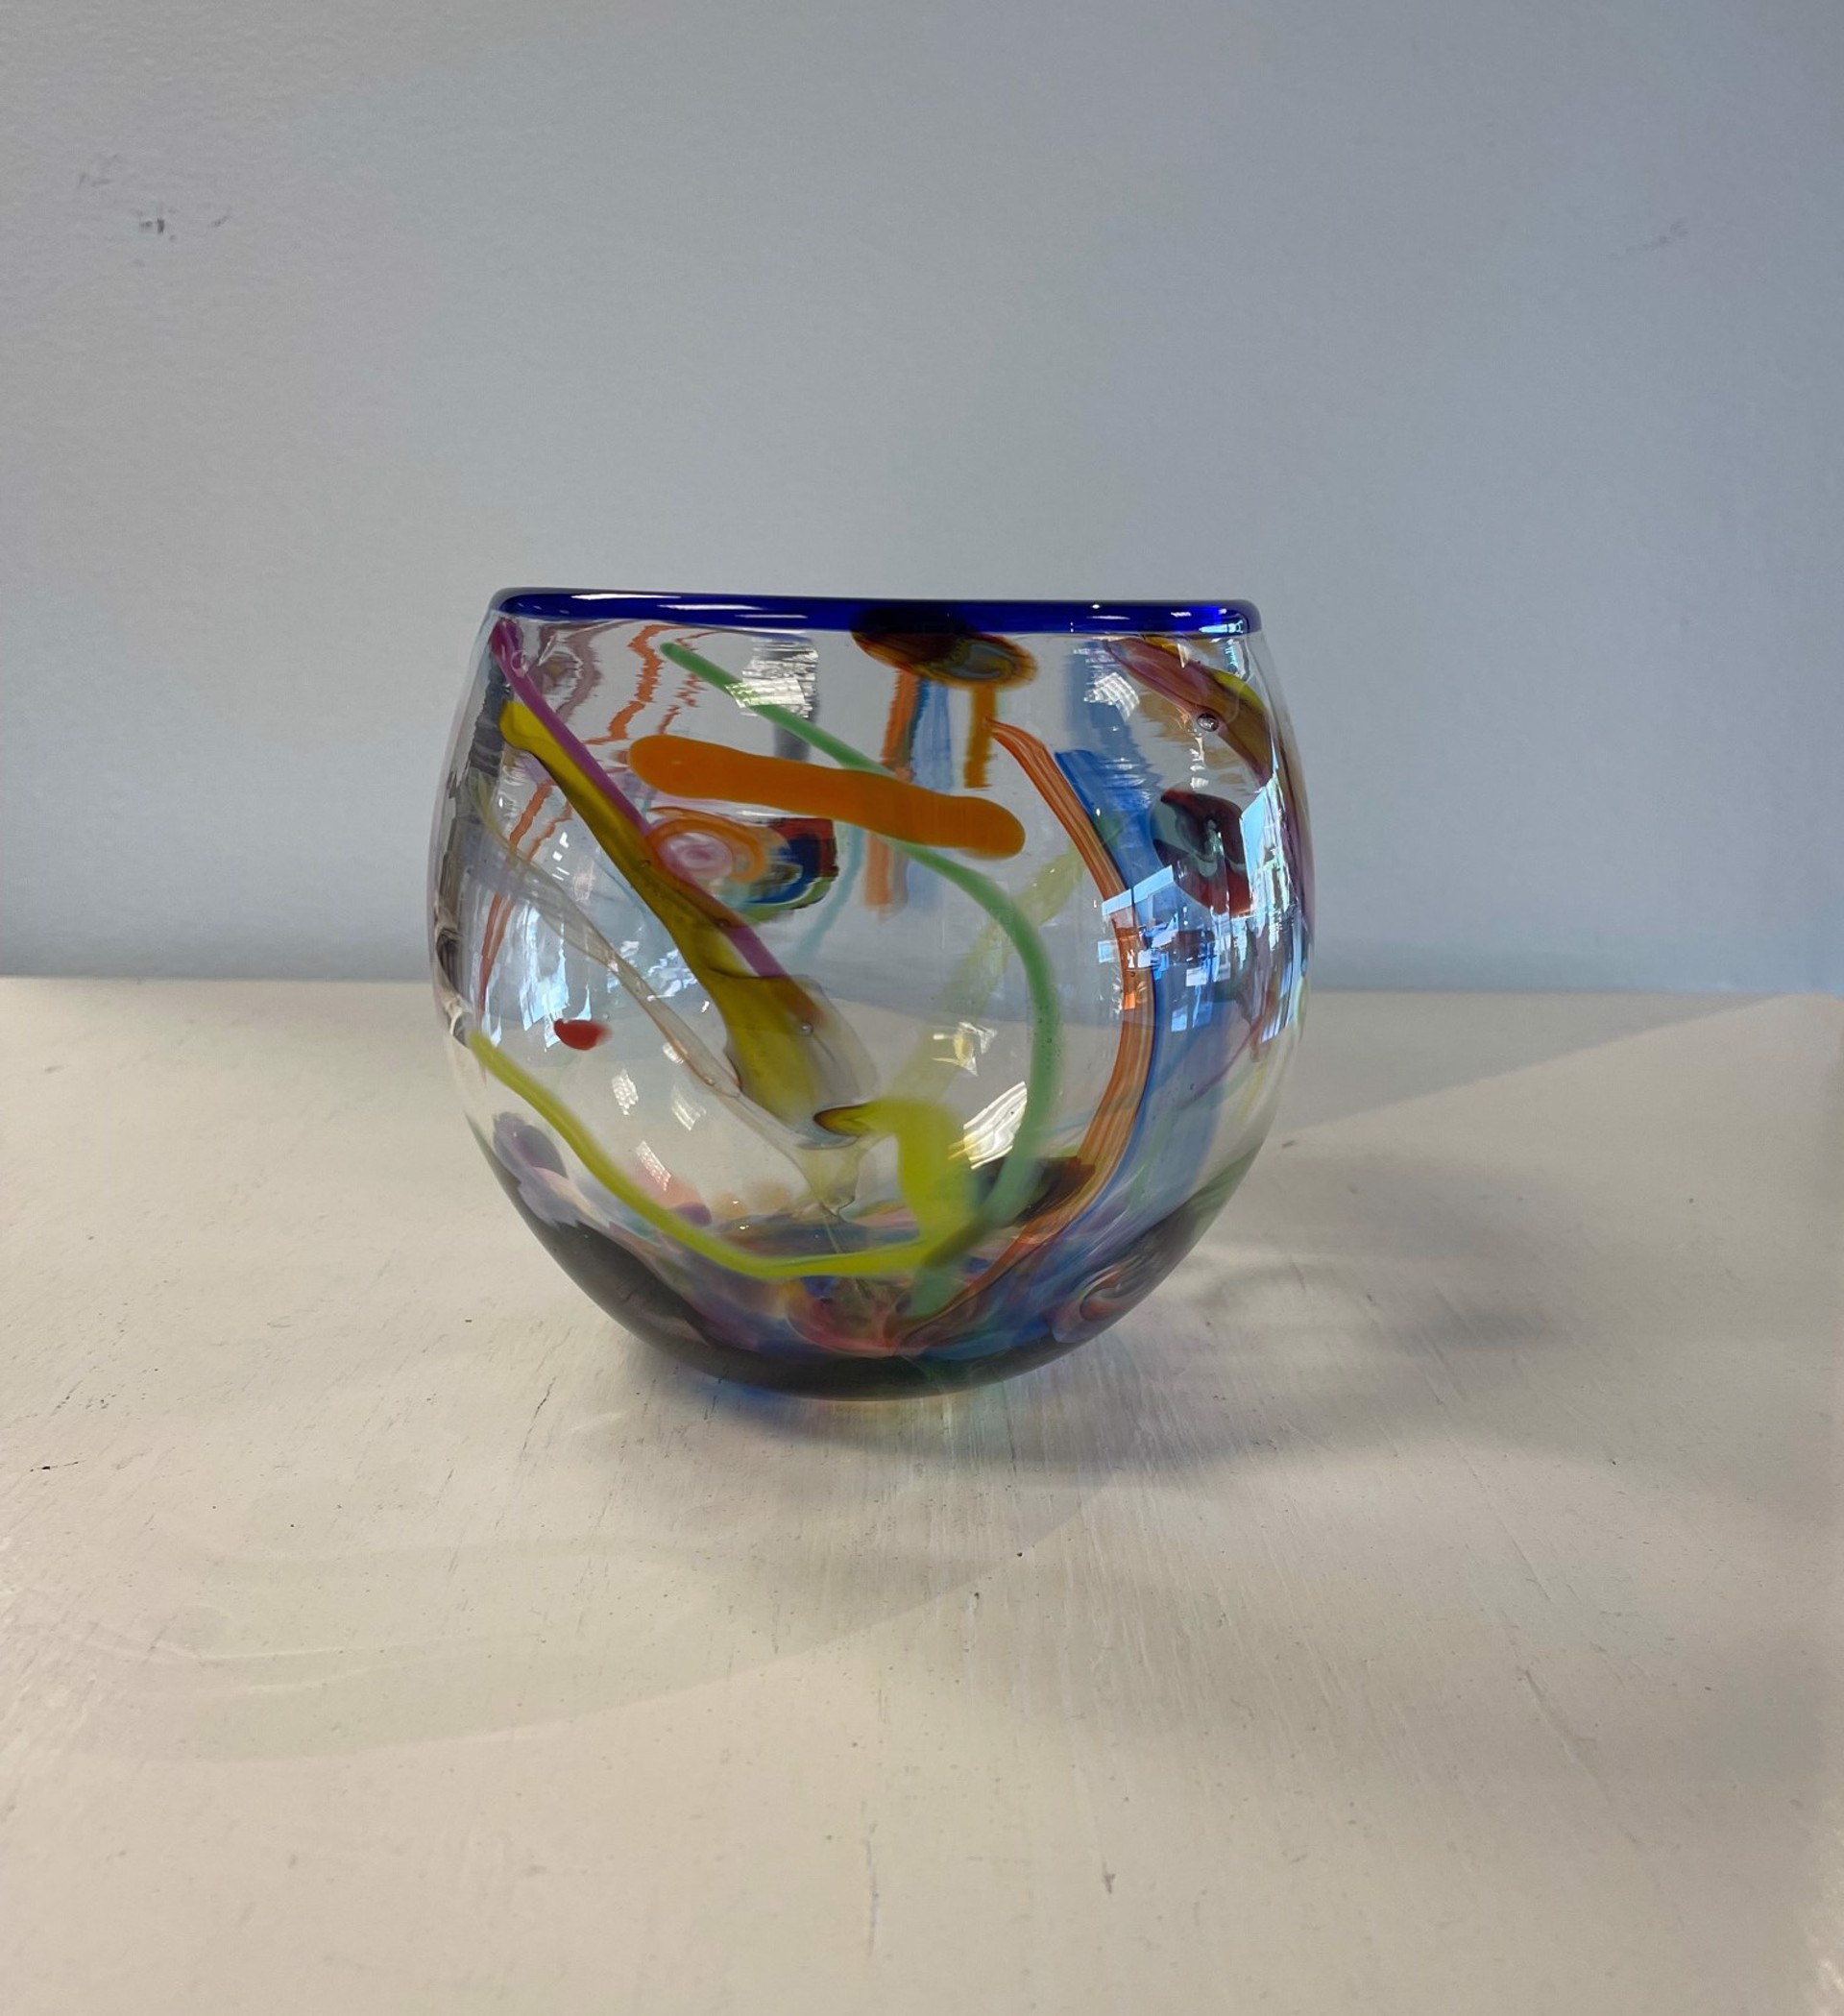 Circus Bowl by AlBo Glass